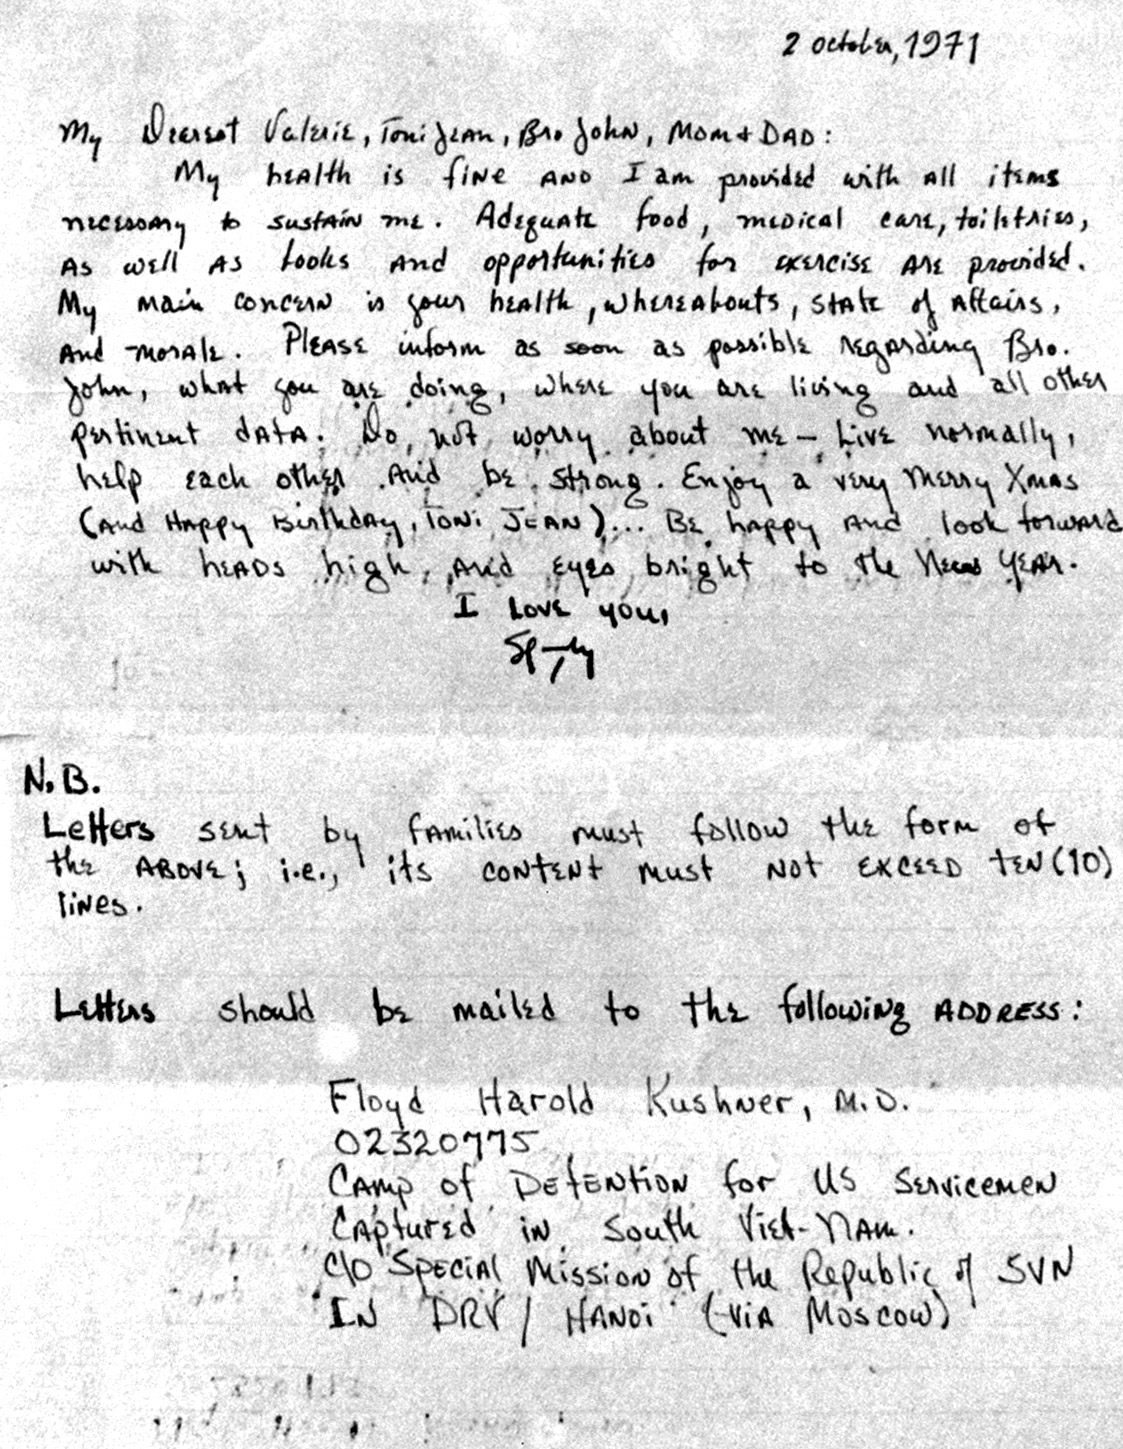 Vietnam POW Hal Kushner letter to his wife and family